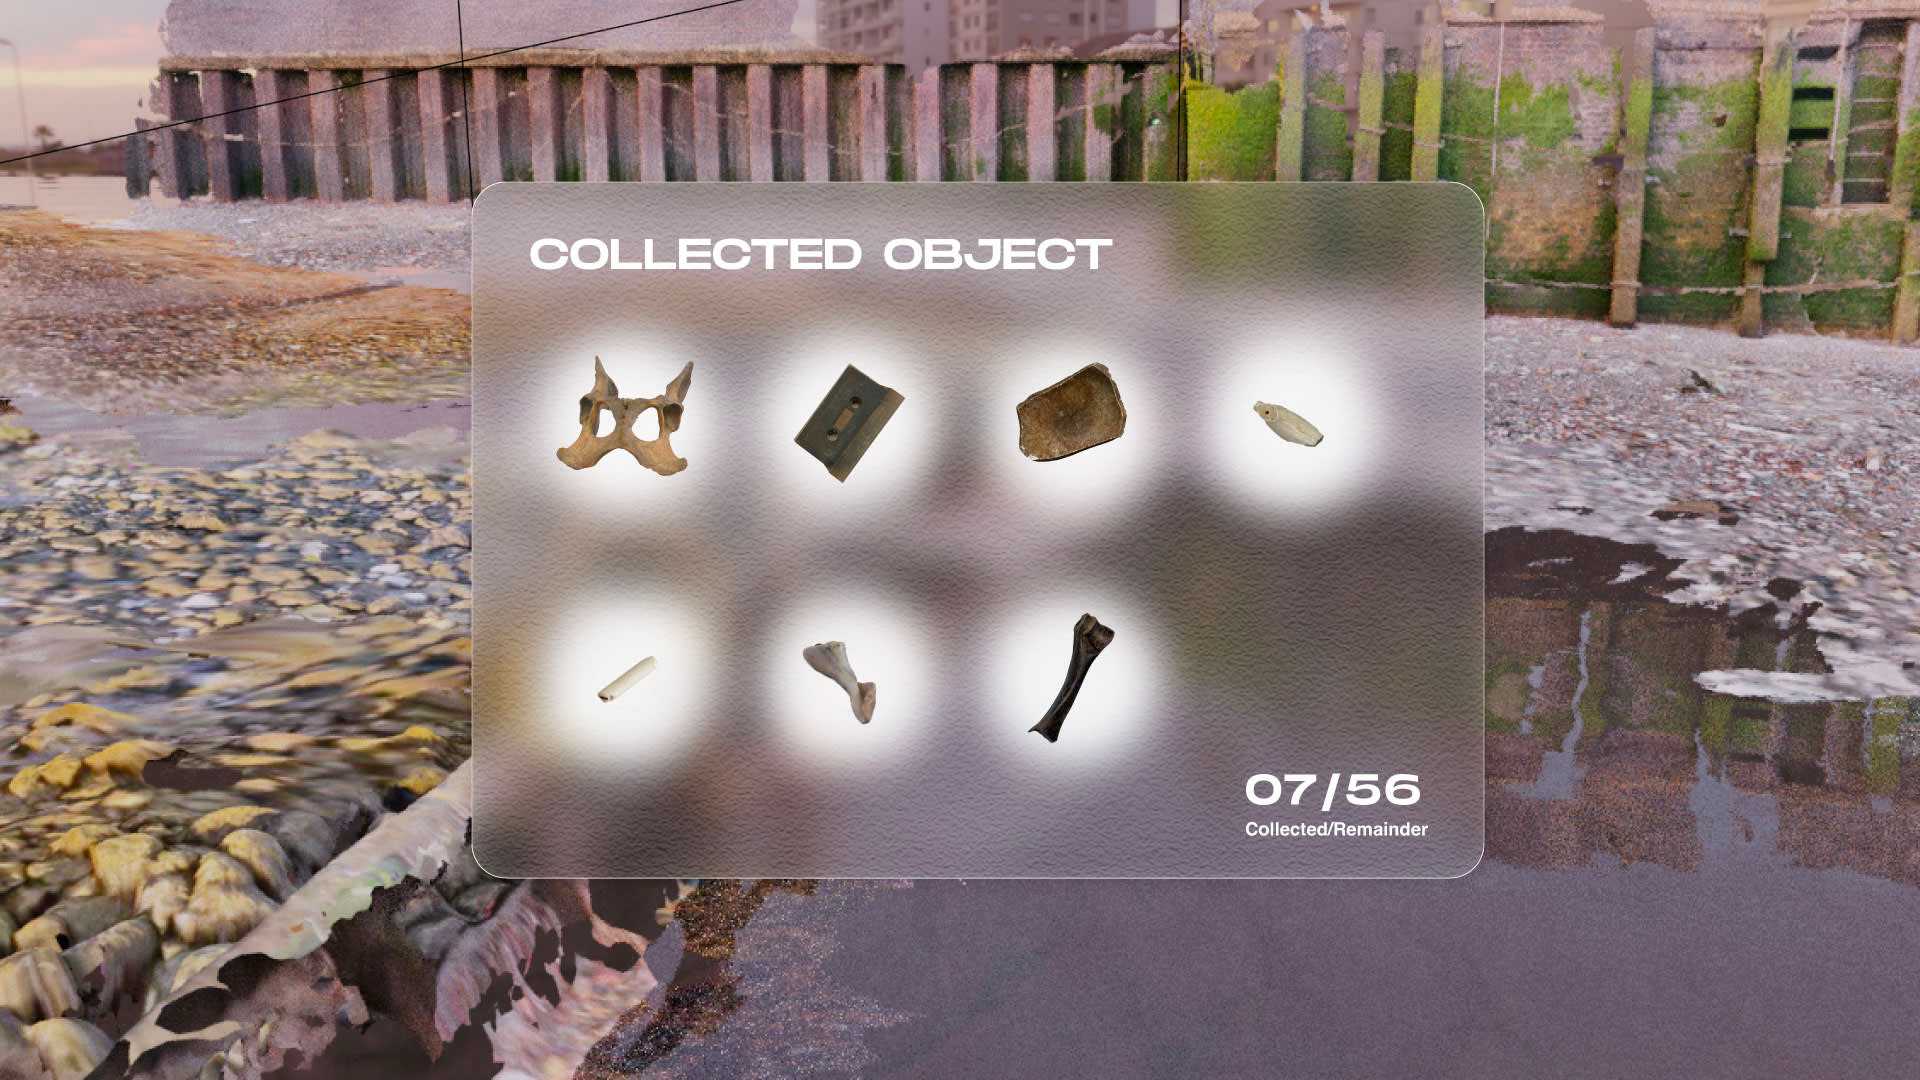 Image of what looks like a still from a computer screen, with a series of collected objects, including various bones and an audio cassette, on a background photograph of urban river foreshore. 